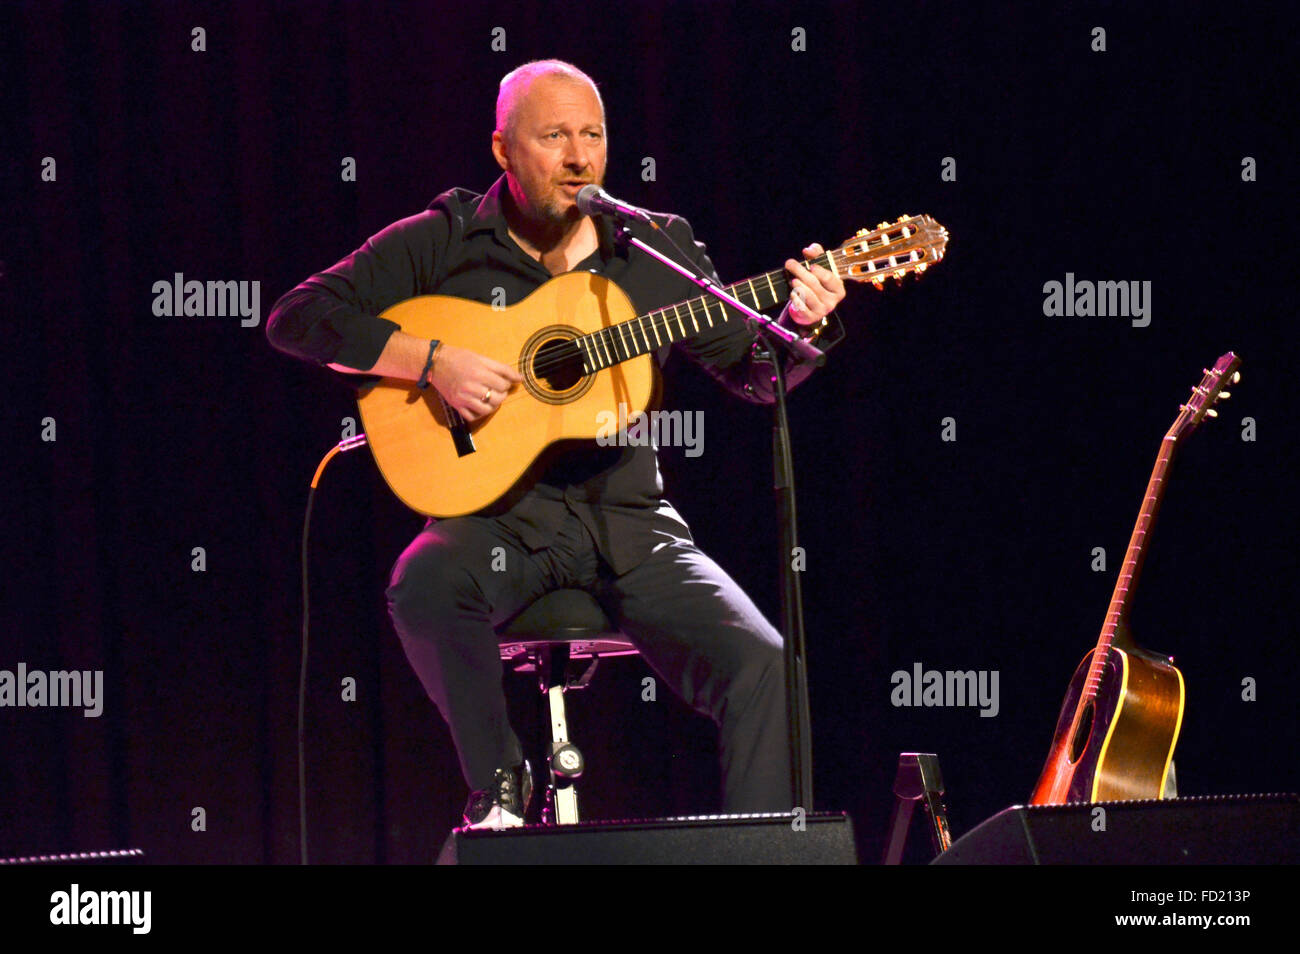 British musician Black aka Colin Vearncombe  plays on his guitar during his 'Acostic Tour 2015' in Munich, Germany, 25 November 2015. Vearncombe, known for his song  'Wonderful Life' from the 1980s died in hospital after a fatal car accident. Photo: Petra Schoenberger/Geisler-Foto/dpa Stock Photo